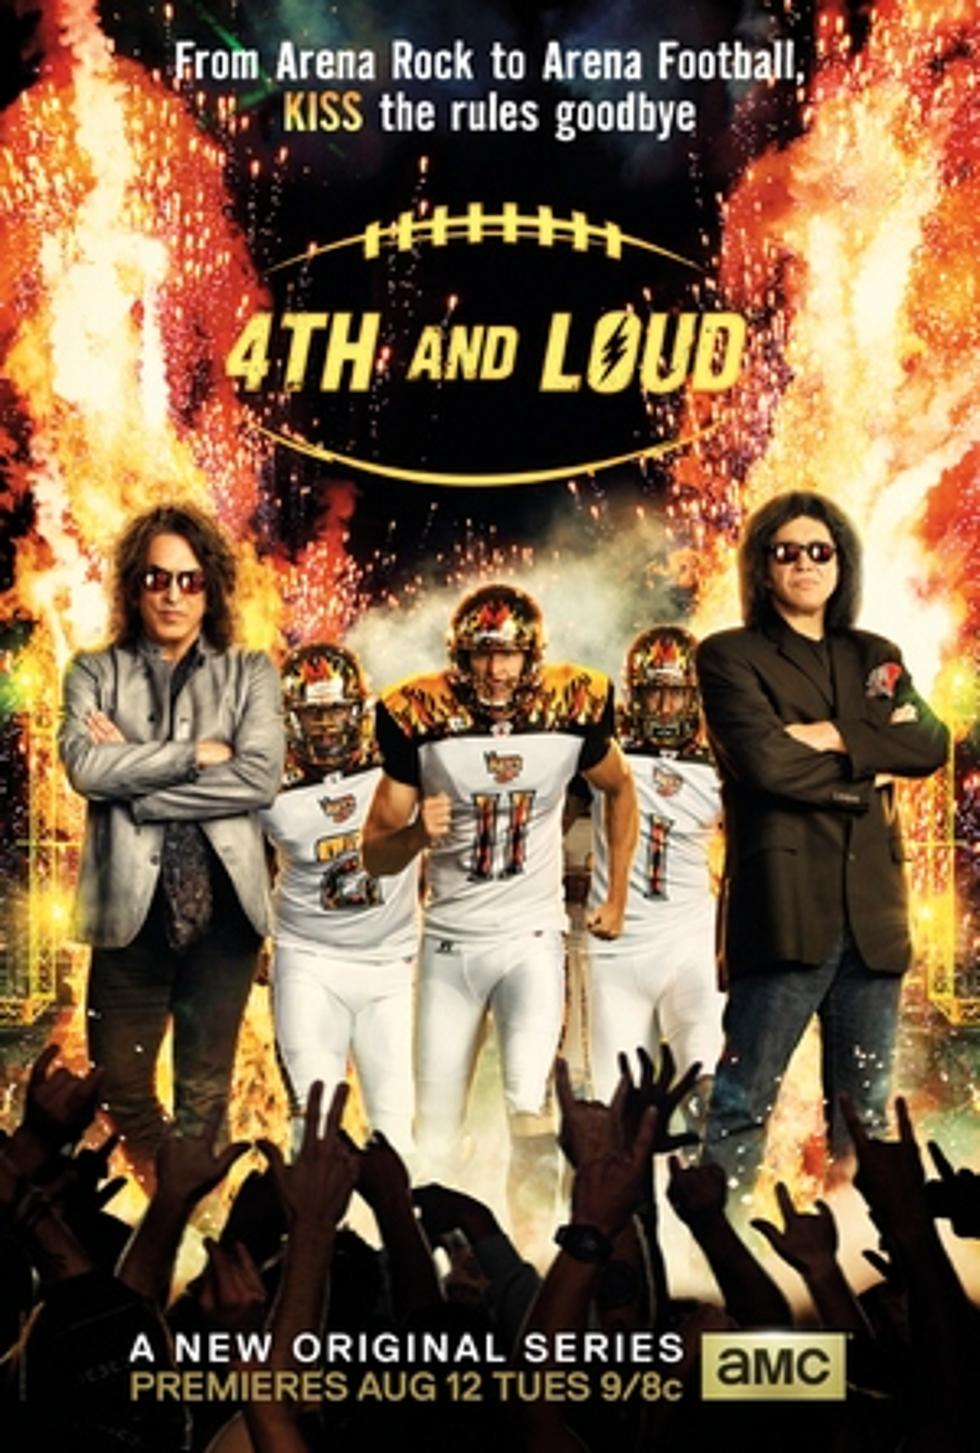 Webisodes Precede KISS Reality Show &#8216;4th and Loud&#8217;